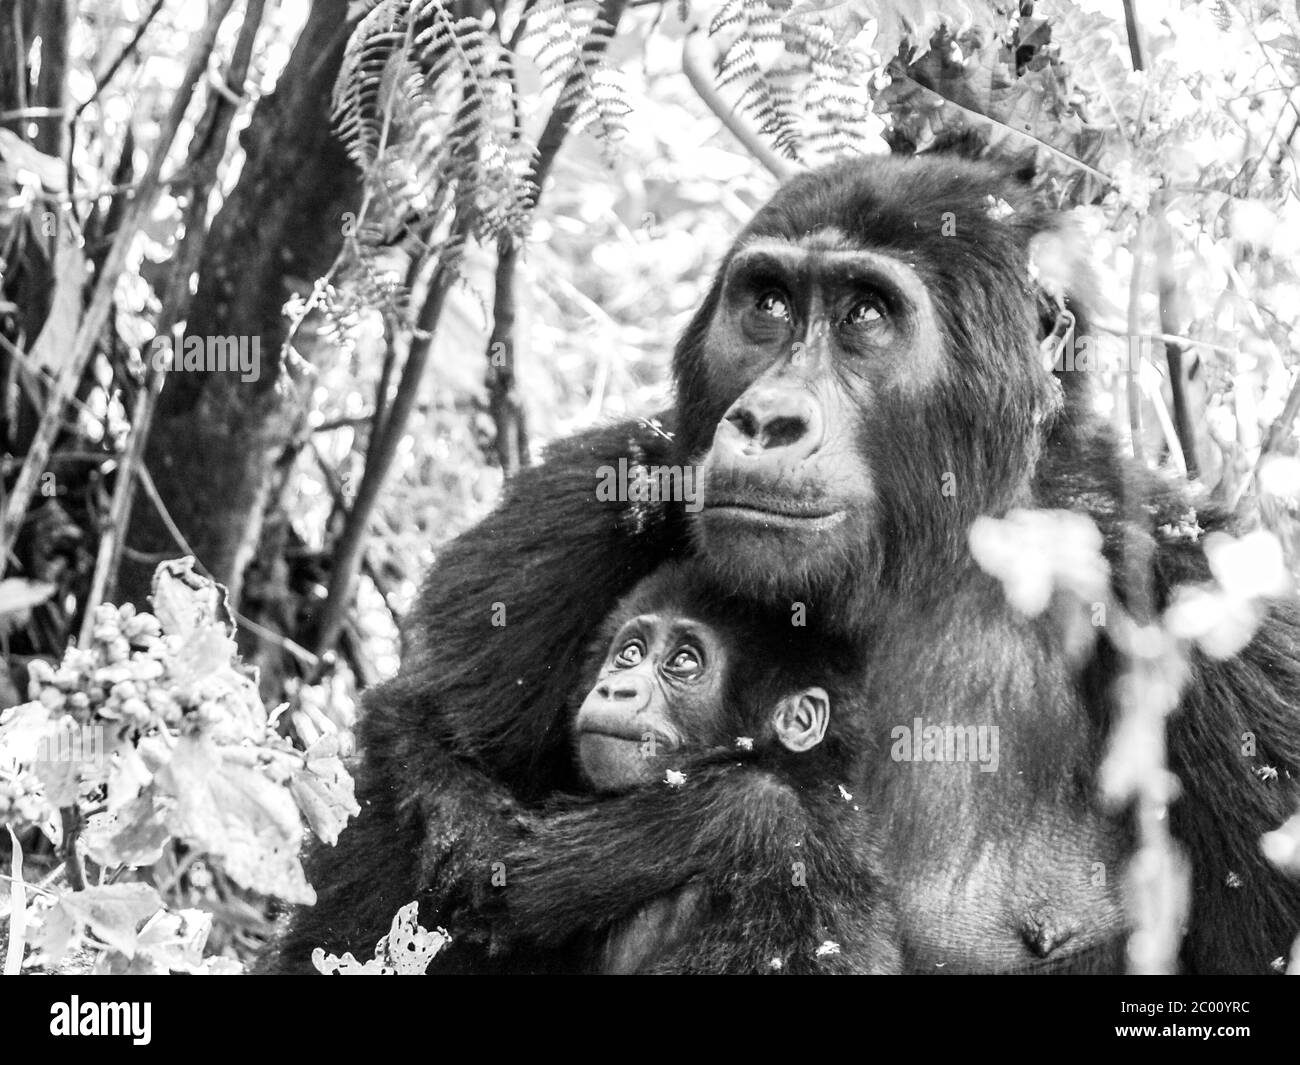 Mountain gorilla family - young baby with sad eyes protected by its mother in the forest, Uganda, Africa. Black and white image. Stock Photo